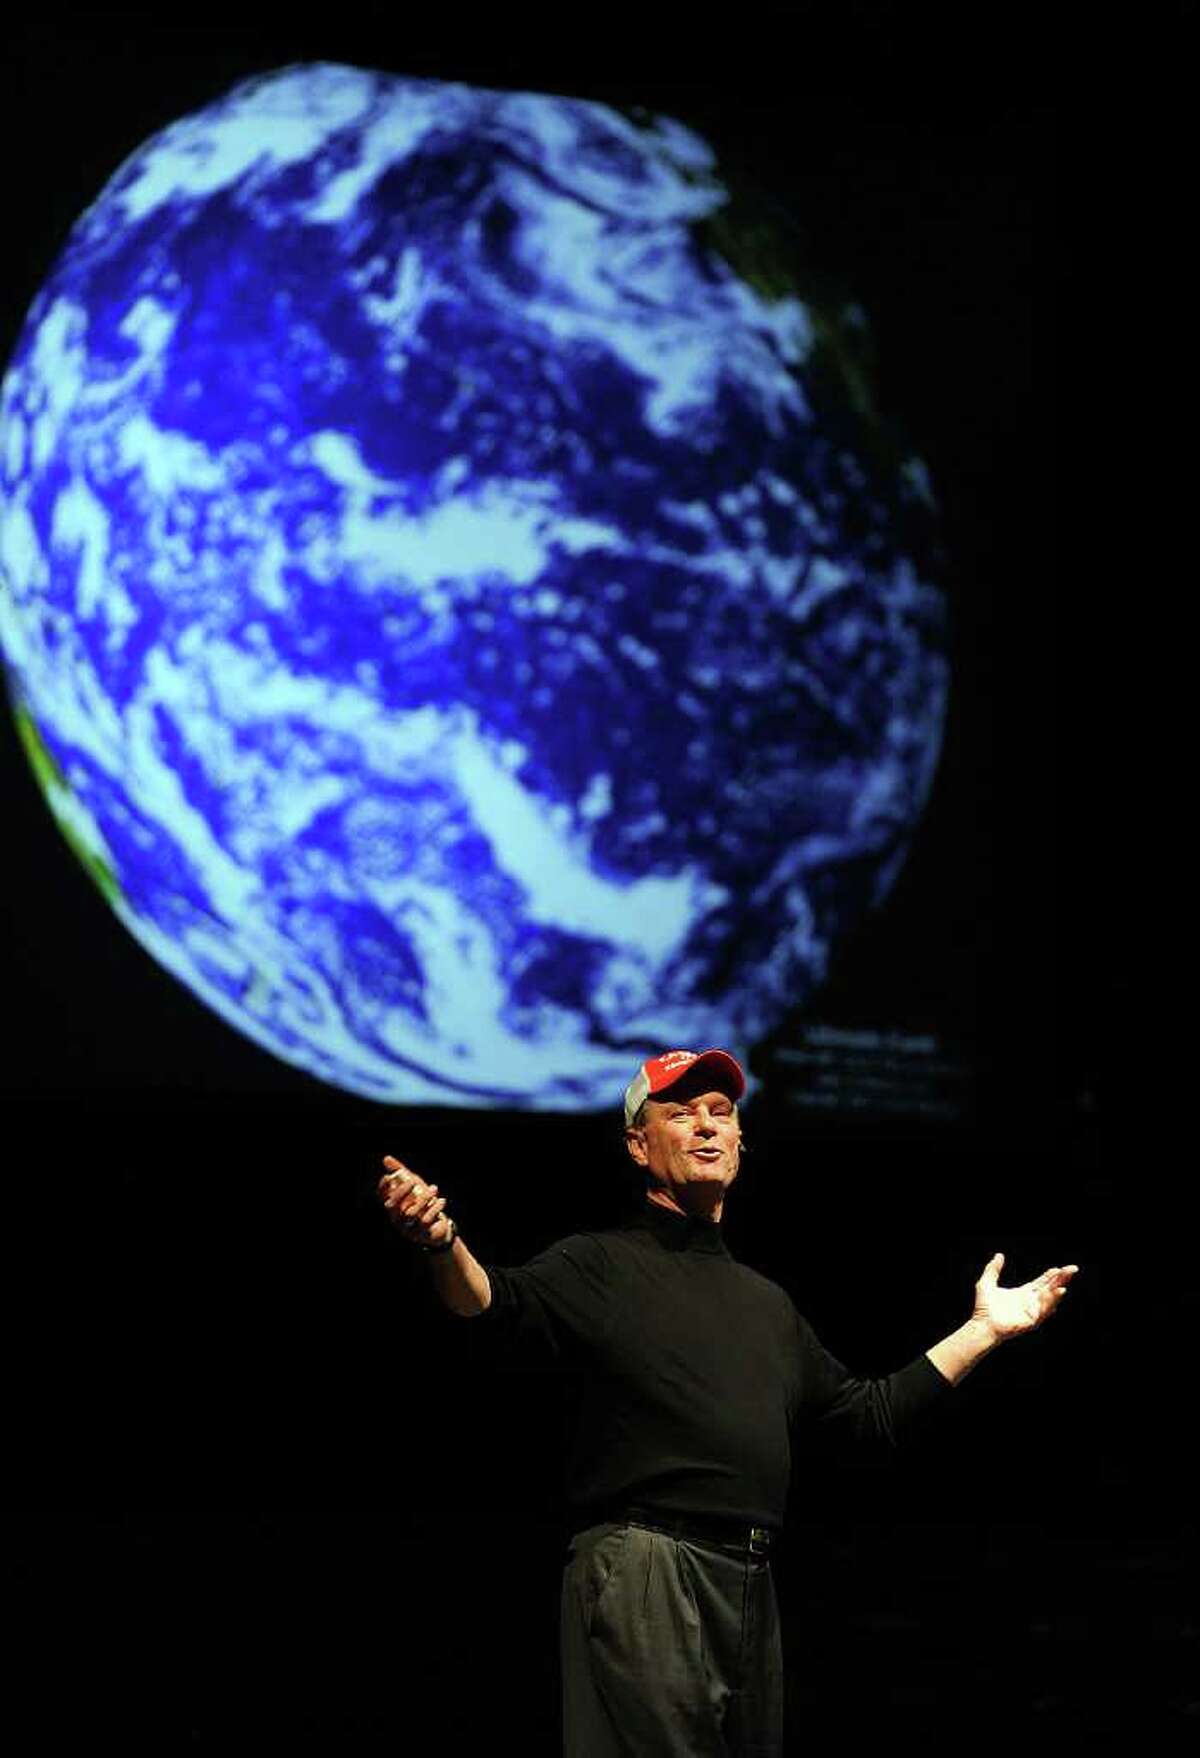 Robert Ballard entertains and educates thousands of area students on the adventures of exploration and science during his presentation at the Montagne Center Tuesday. Ballard is most noted for finding the RMS Titanic in 1985. Photo taken Tuesday, January 31, 2012 Guiseppe Barranco/The Enterprise